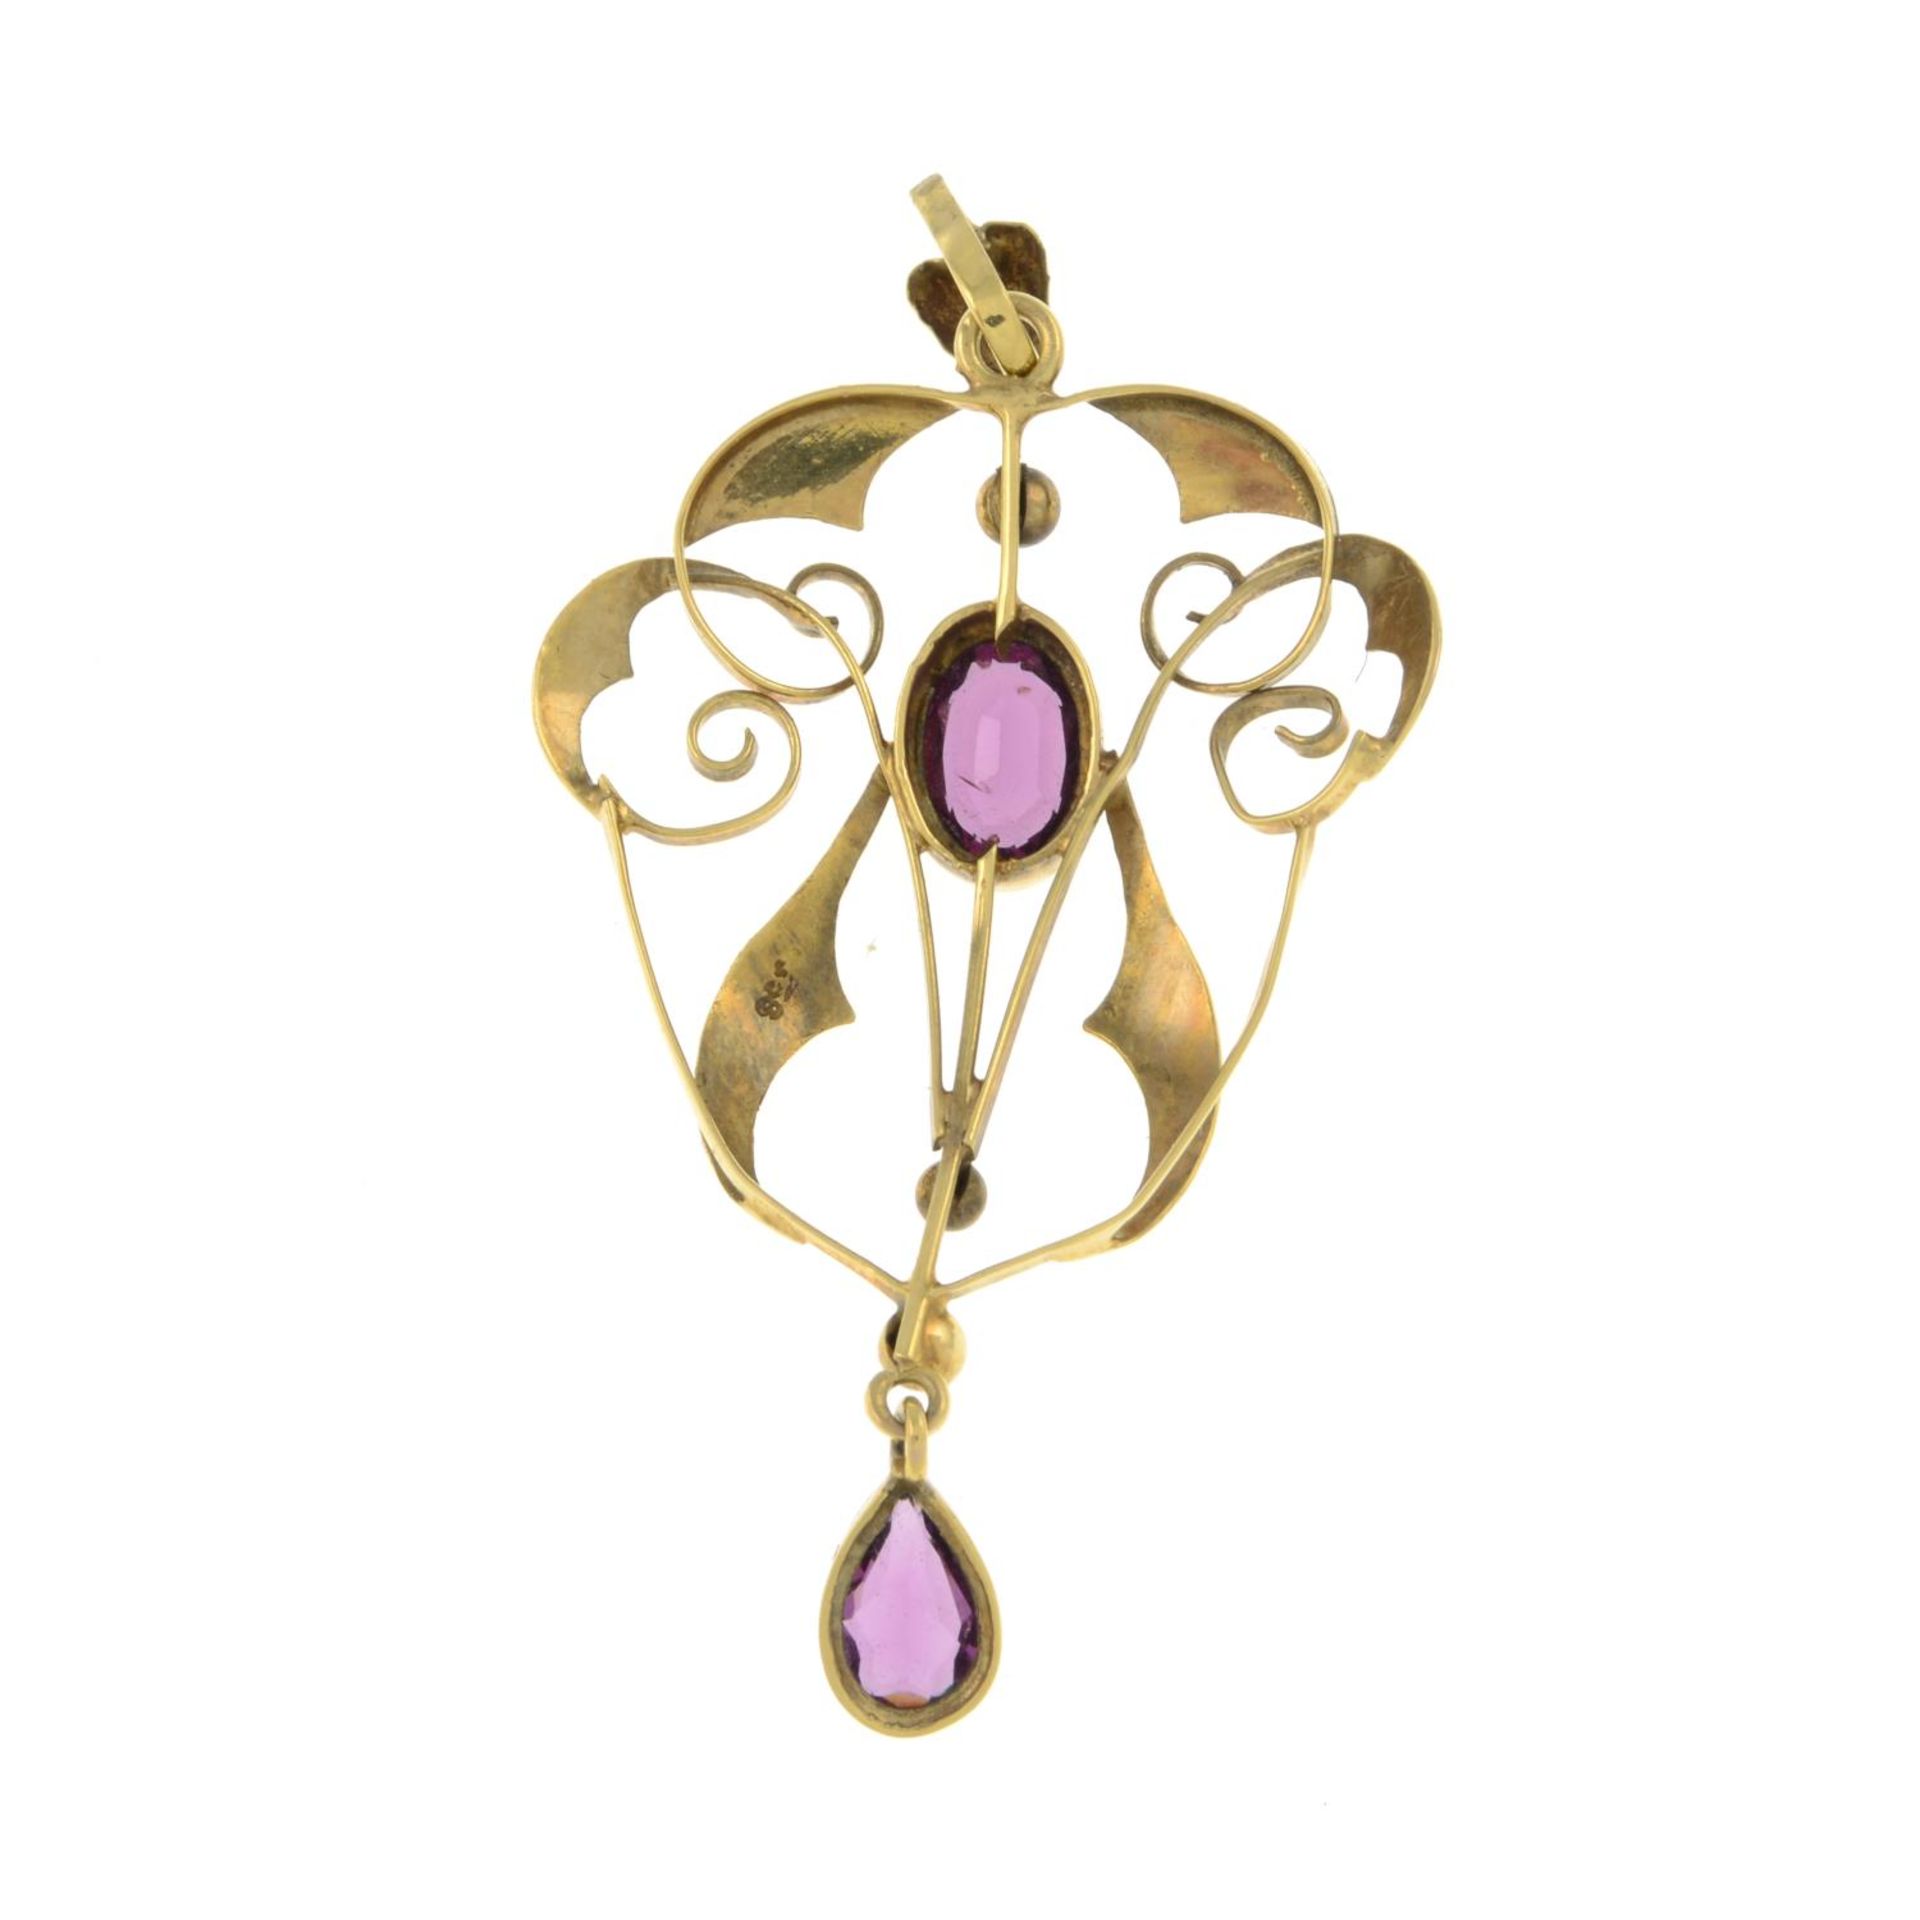 An early 20th century 9ct gold garnet pendant.Stamped 9ct.Length 5.2cms. - Image 2 of 2